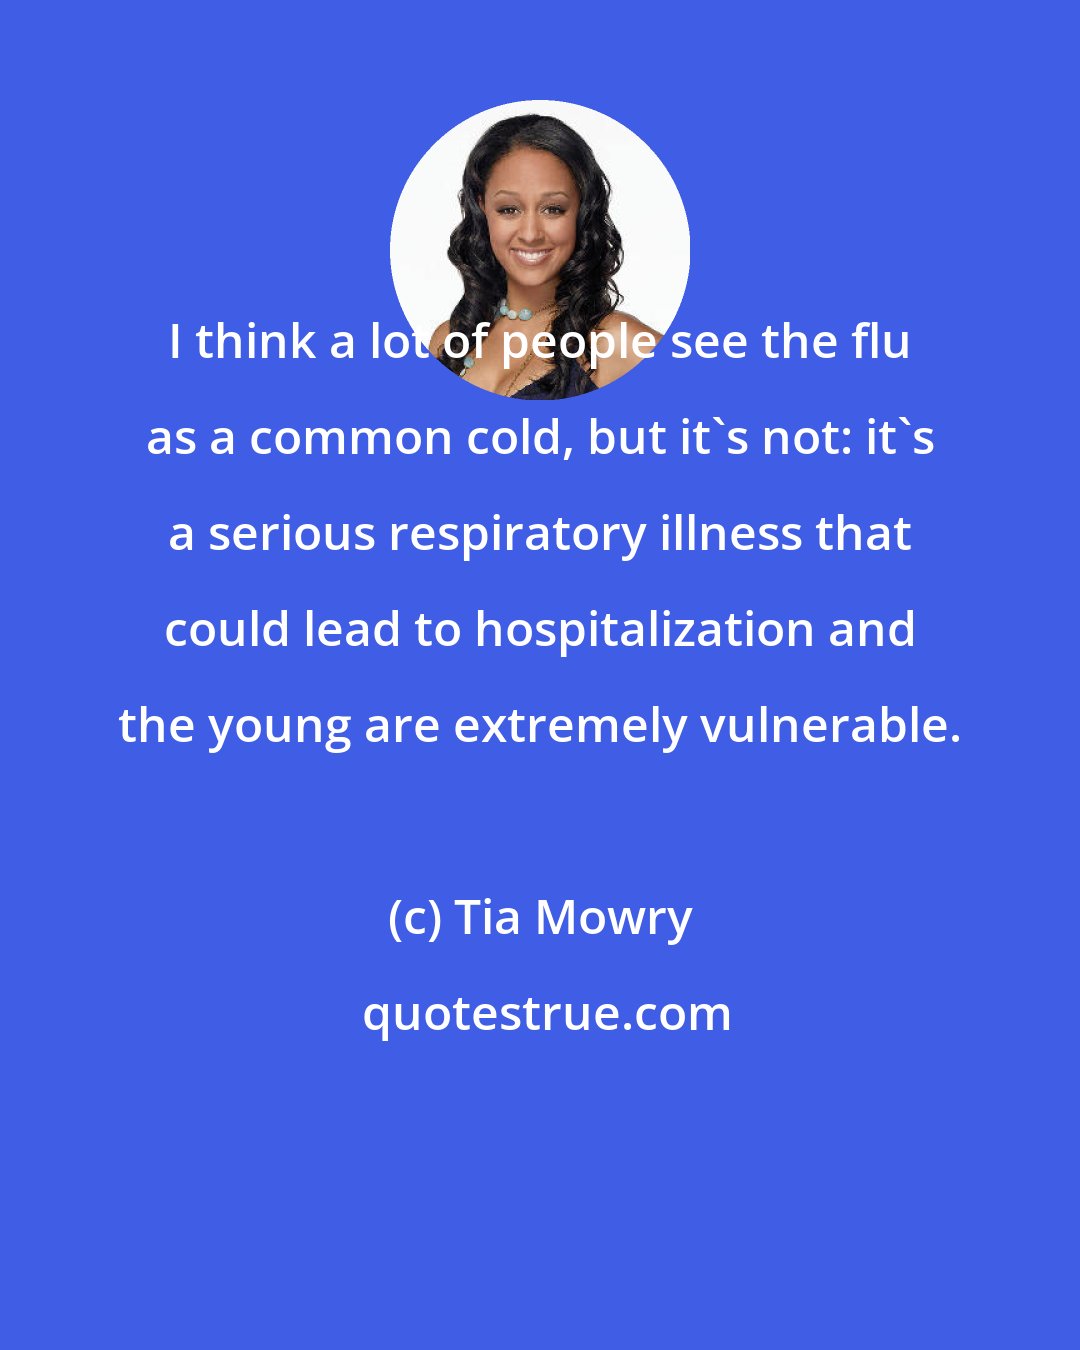 Tia Mowry: I think a lot of people see the flu as a common cold, but it's not: it's a serious respiratory illness that could lead to hospitalization and the young are extremely vulnerable.